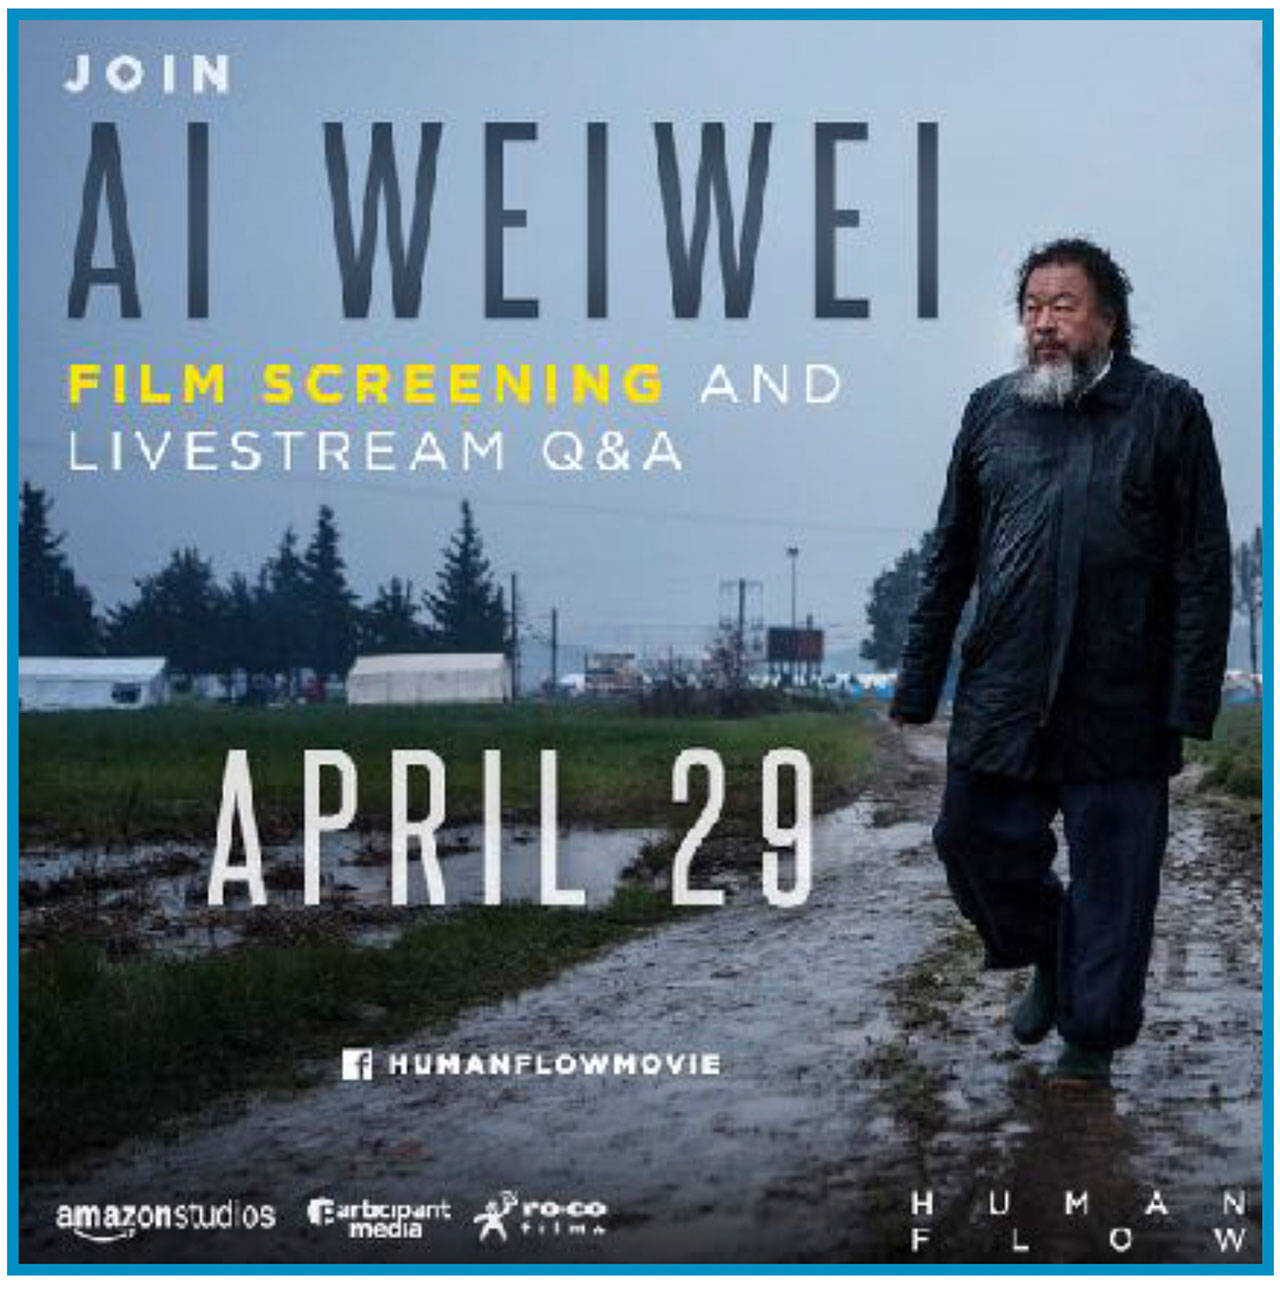 Image courtesy of Kathleen Alcala | Iconic Chinese artist and activist Ai Weiwei will live-stream a Q&A session between two free screenings of “Human Flow,” a documentary film about the global refugee crisis that he directed, at 2 p.m. Sunday, April 29 at the Lynwood Theatre.